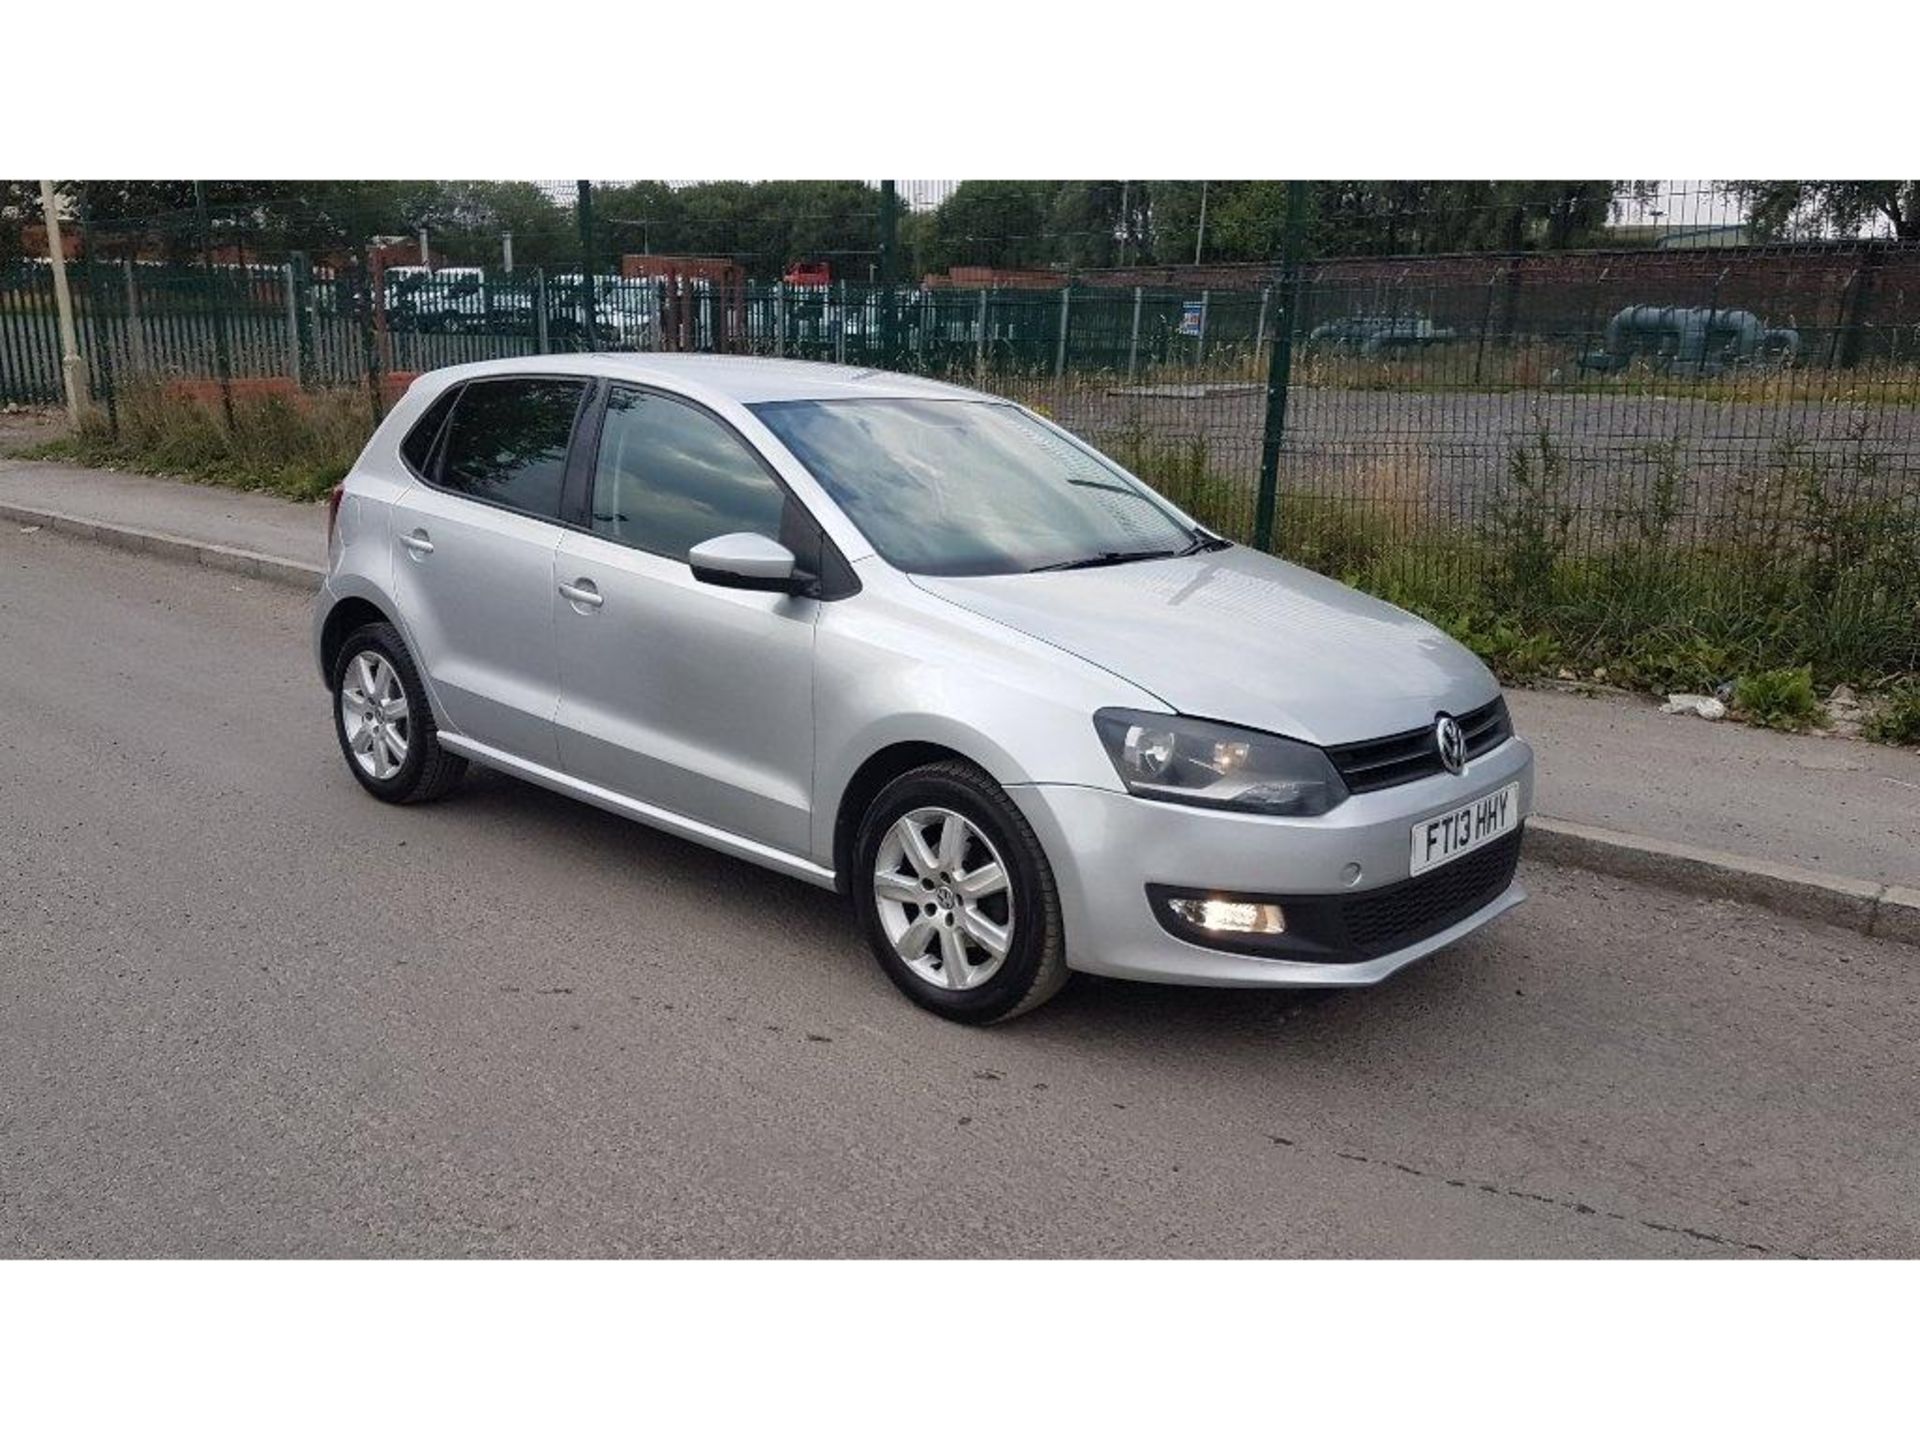 VOLKSWAGEN POLO 1.2 MATCH EDITION 5DR, FT13 HHY, 20.05.2013, PETROL, MILEAGE 28,499, MANUAL, 1.2L, 2 - Image 5 of 19